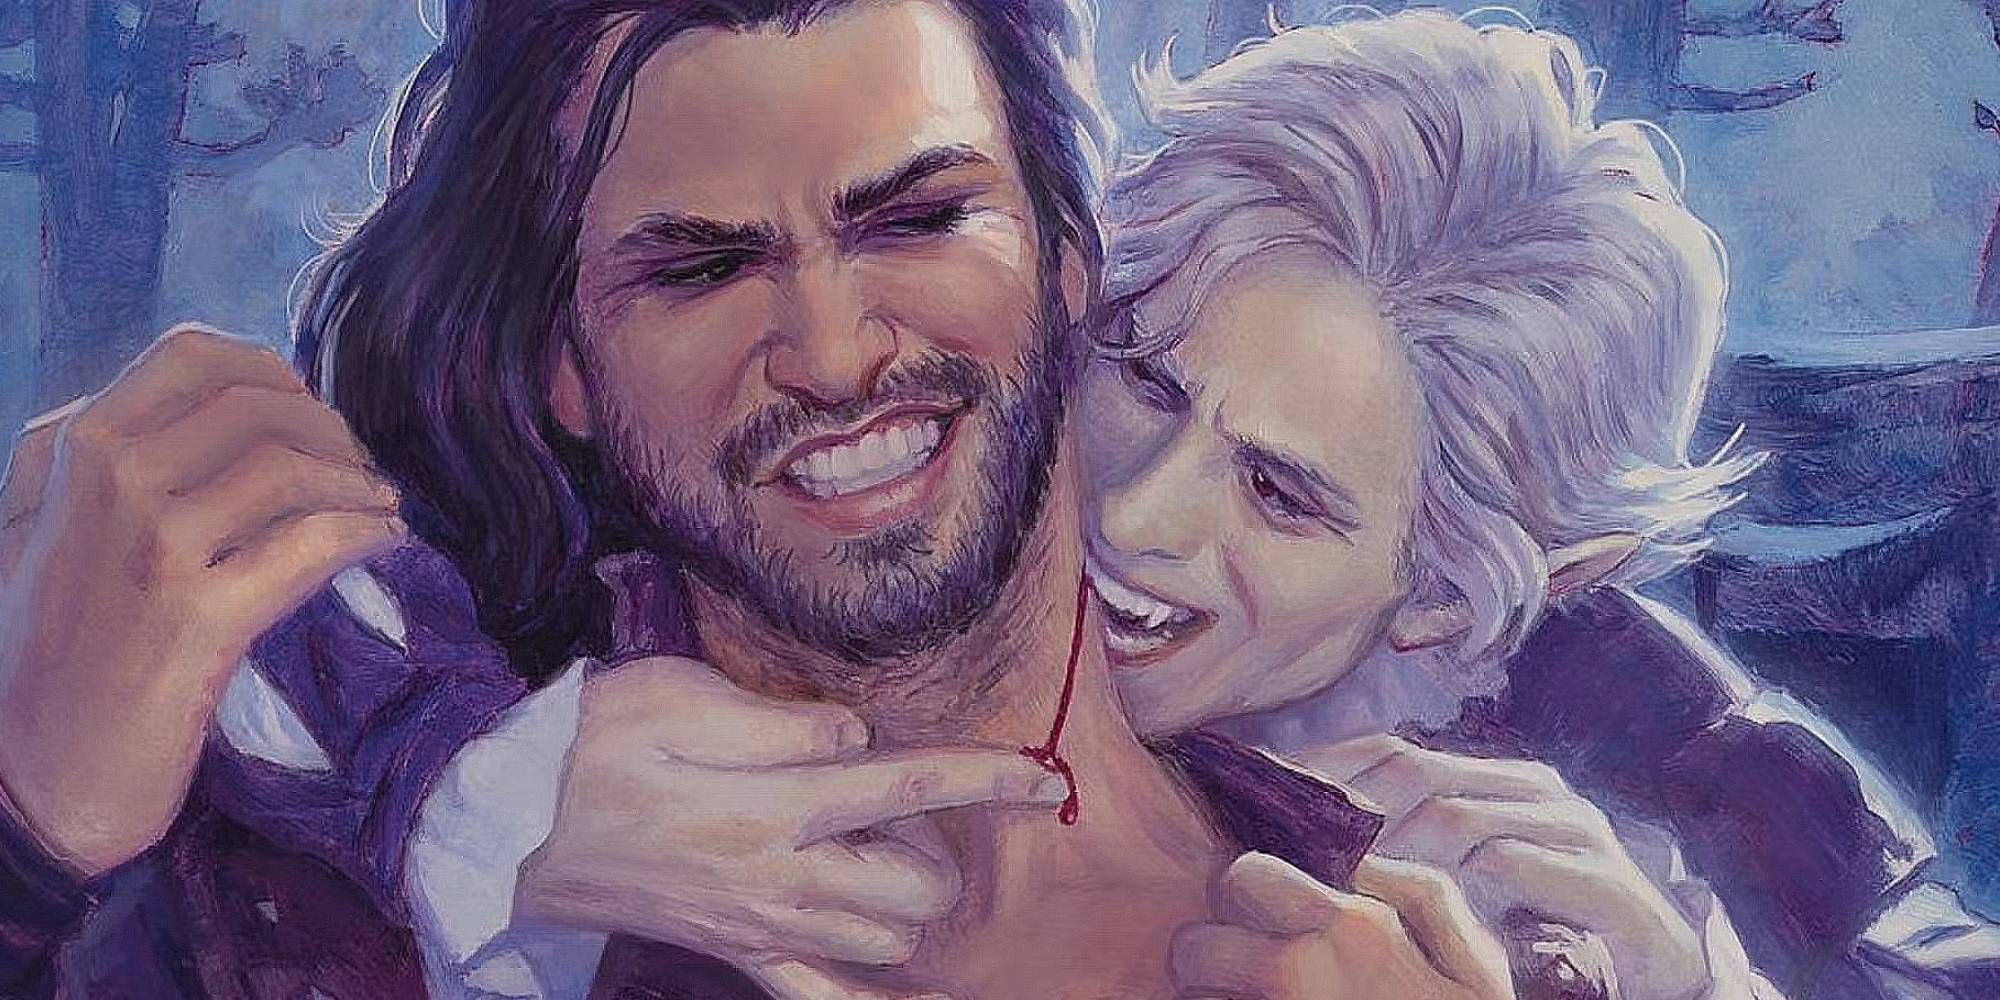 A vampire bites into the neck of a grimacing man 